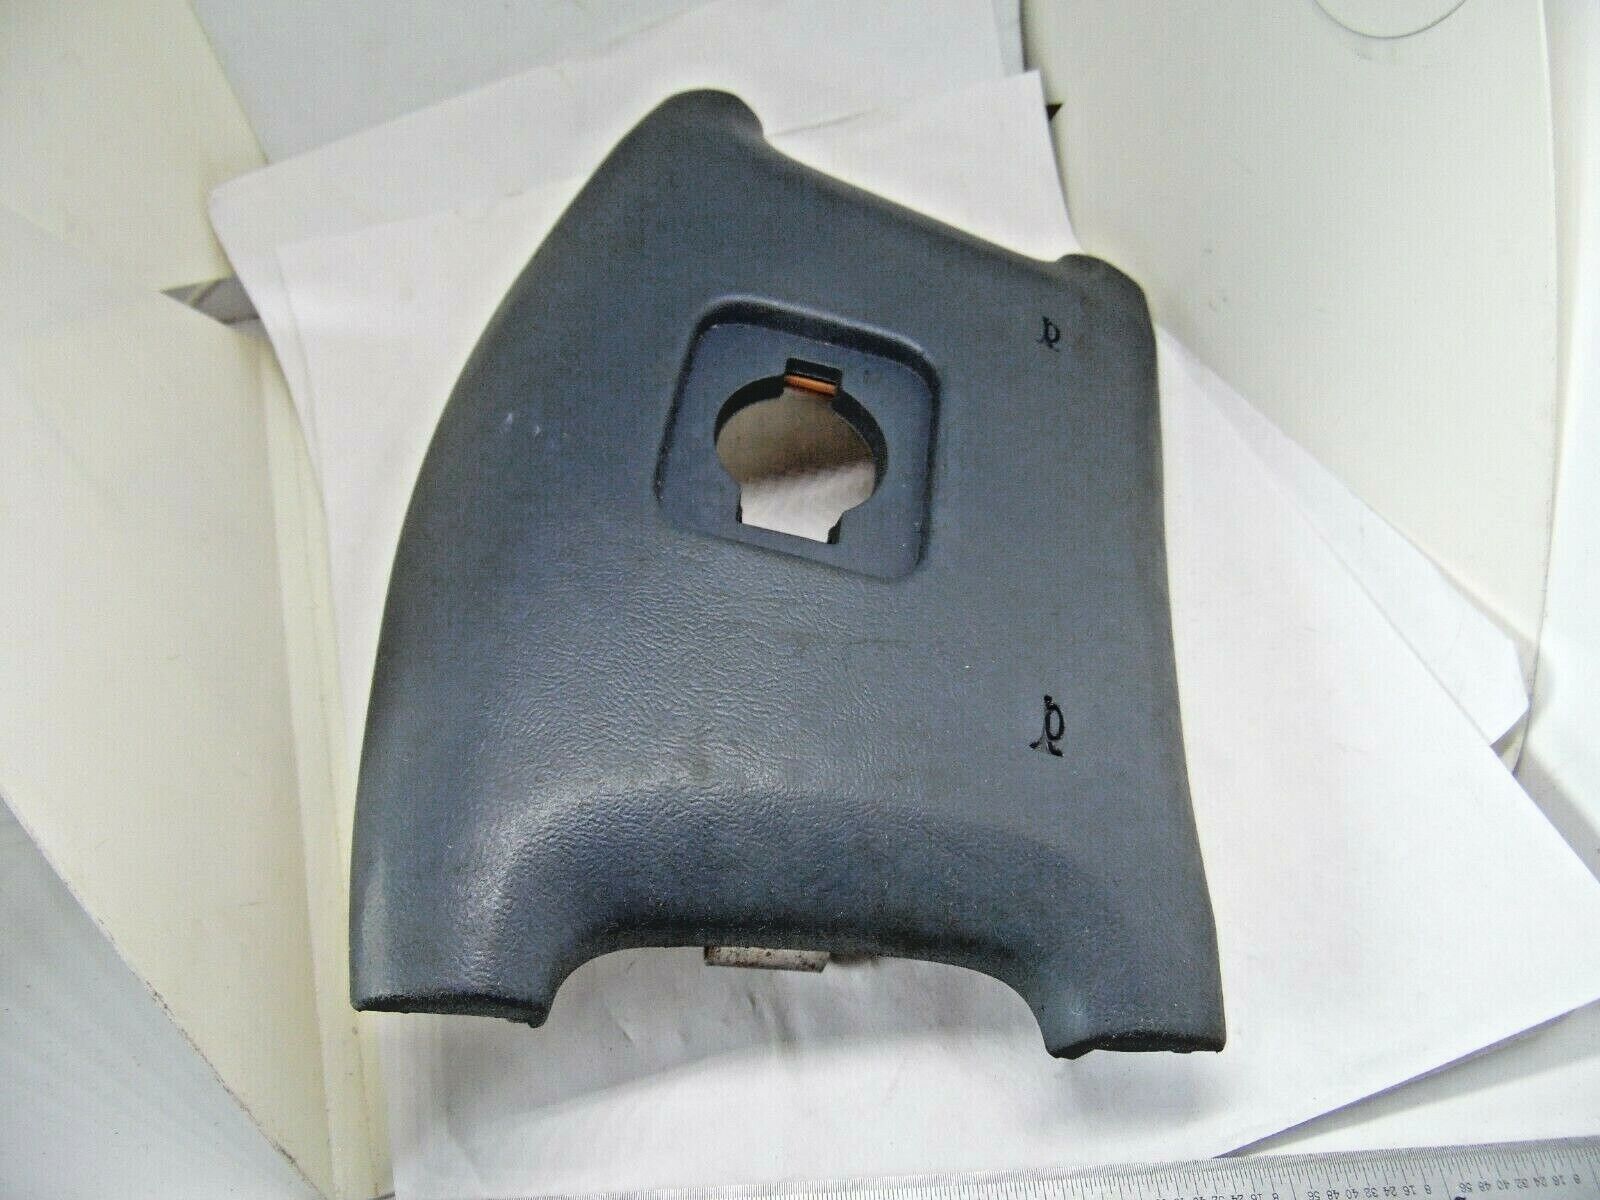  FORD TEMPO TOPAZ STEERING WHEEL HORN PAD SWITCH NEW OEM CRYSTAL BLUE 